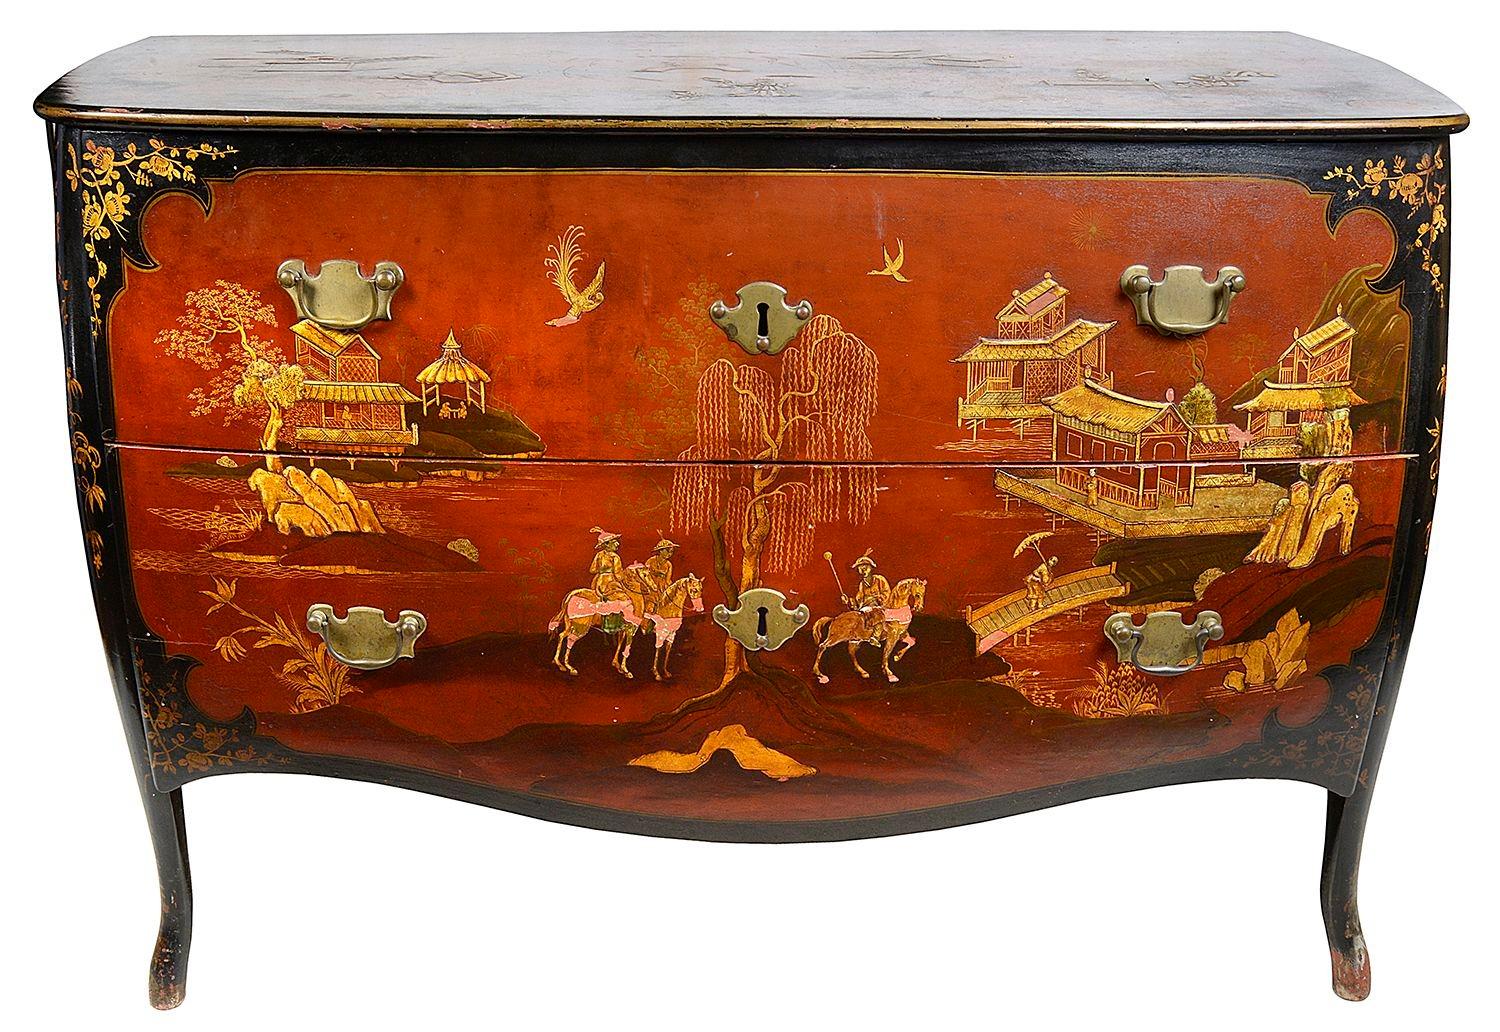 A very decorative and imposing early 18th Century Venetian, Red Chinoiserie lacquer bombe commode.
Having ebonized boarders with gilded scrolling foliate decoration surrounding inset red lacquer panels depicting classical oriental scenes of pagoda